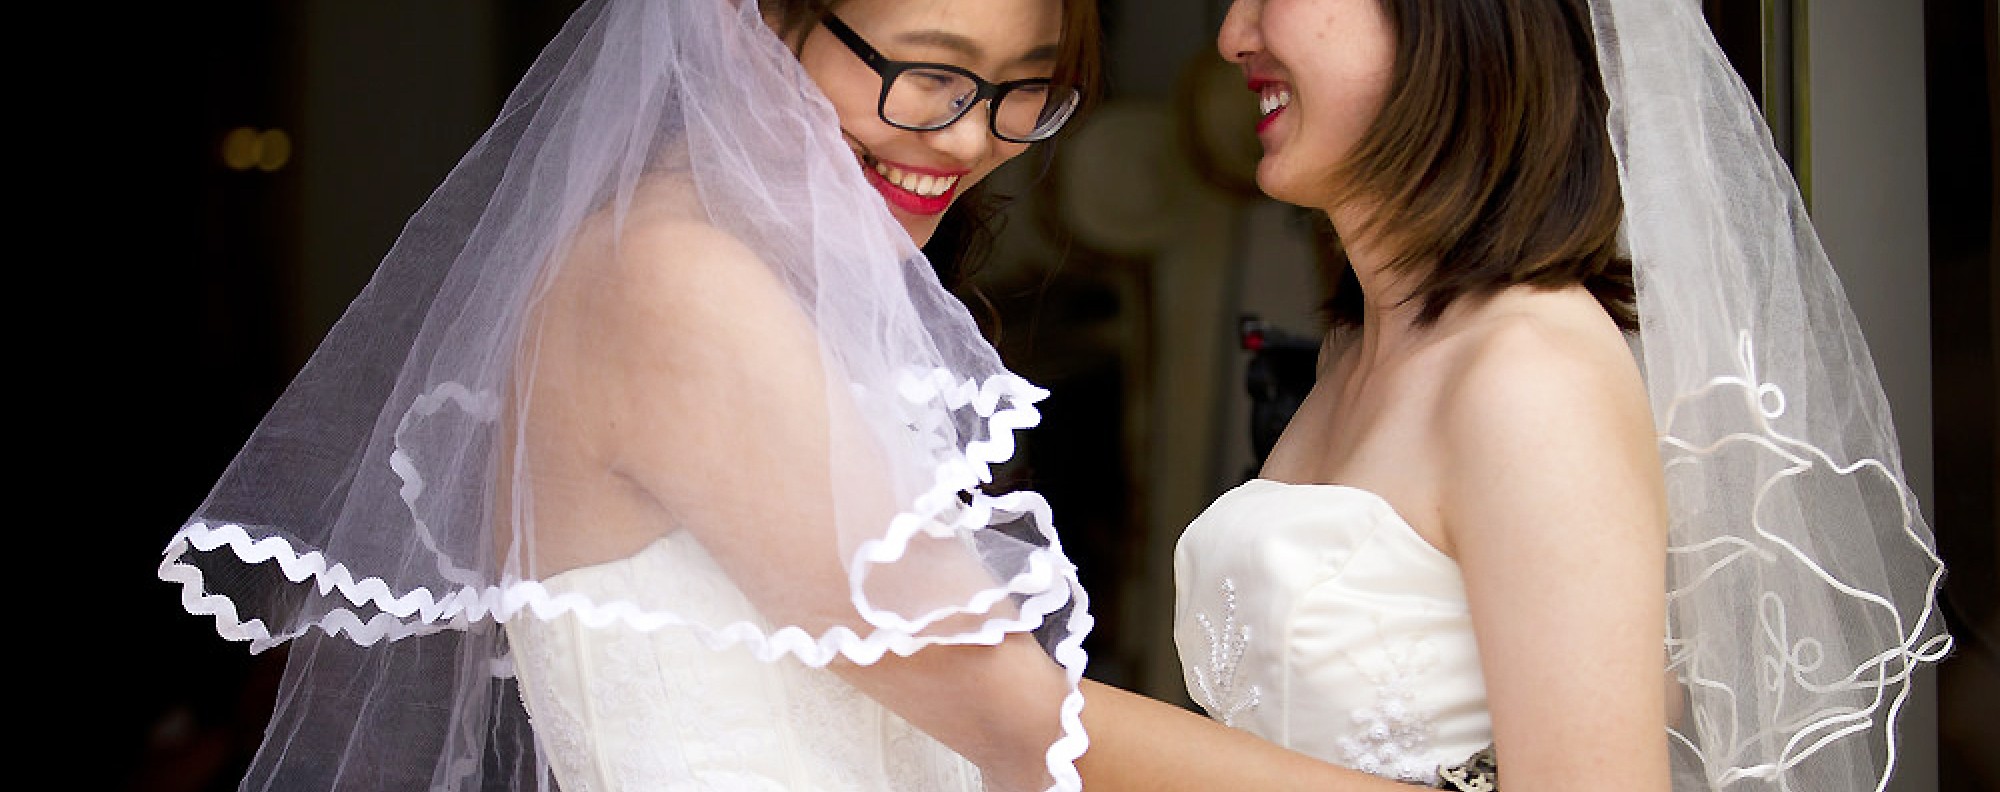 Lesbian couple hold marriage ceremony to push for legal same-sex unions in China South China Morning Post photo